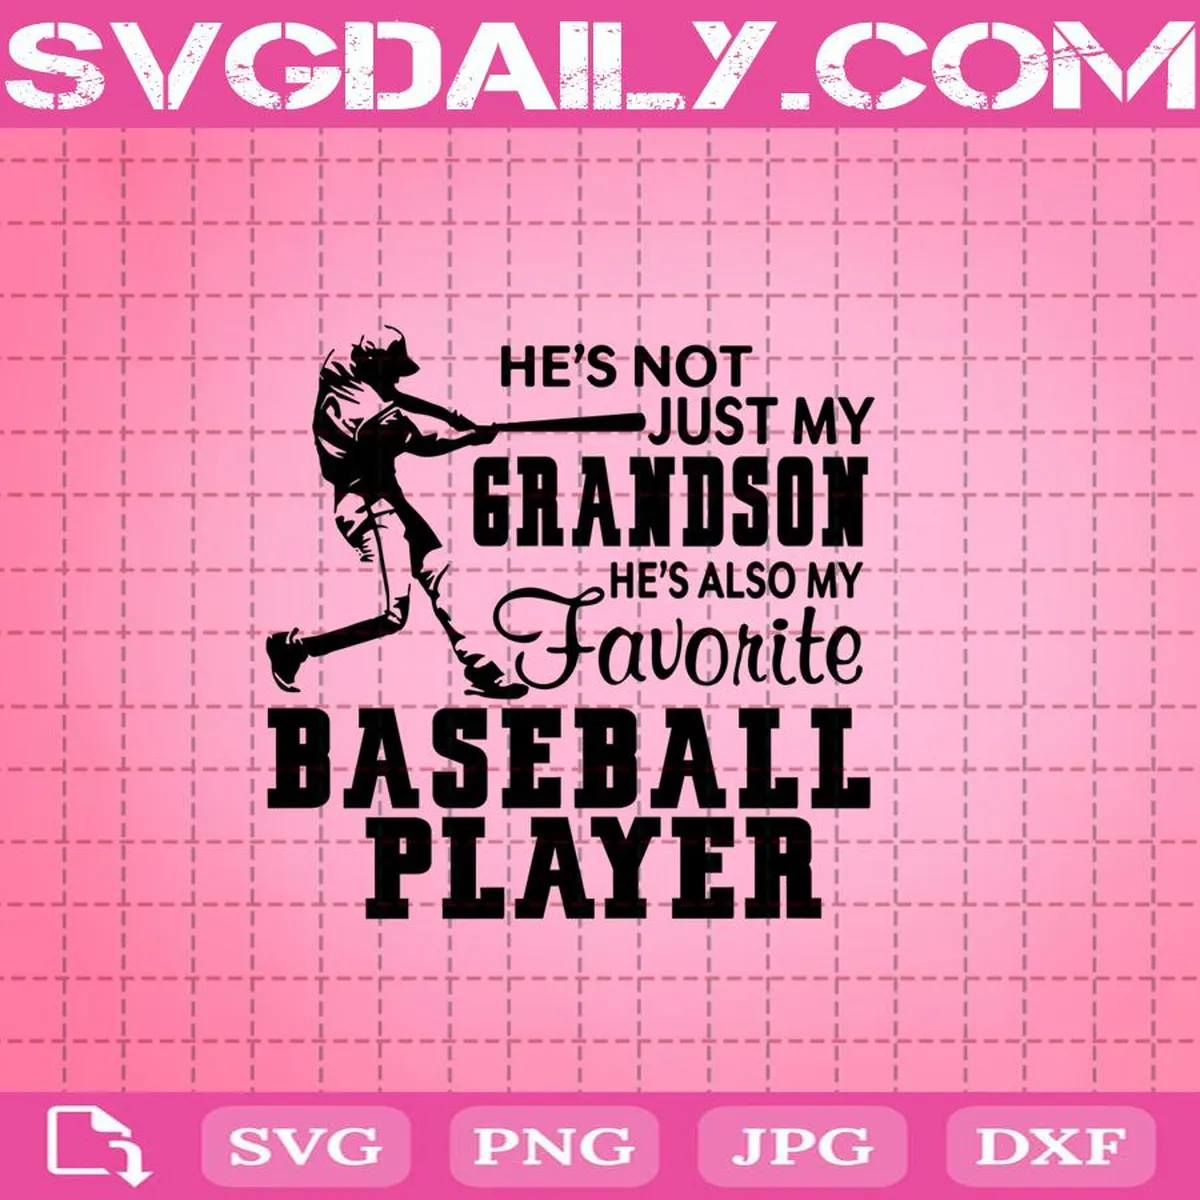 He's Not Just My Grandsdn He's Also My Favorite Baseball Player Svg, Baseball Player Svg, Baseball Svg, Svg Png Dxf Eps Download Files